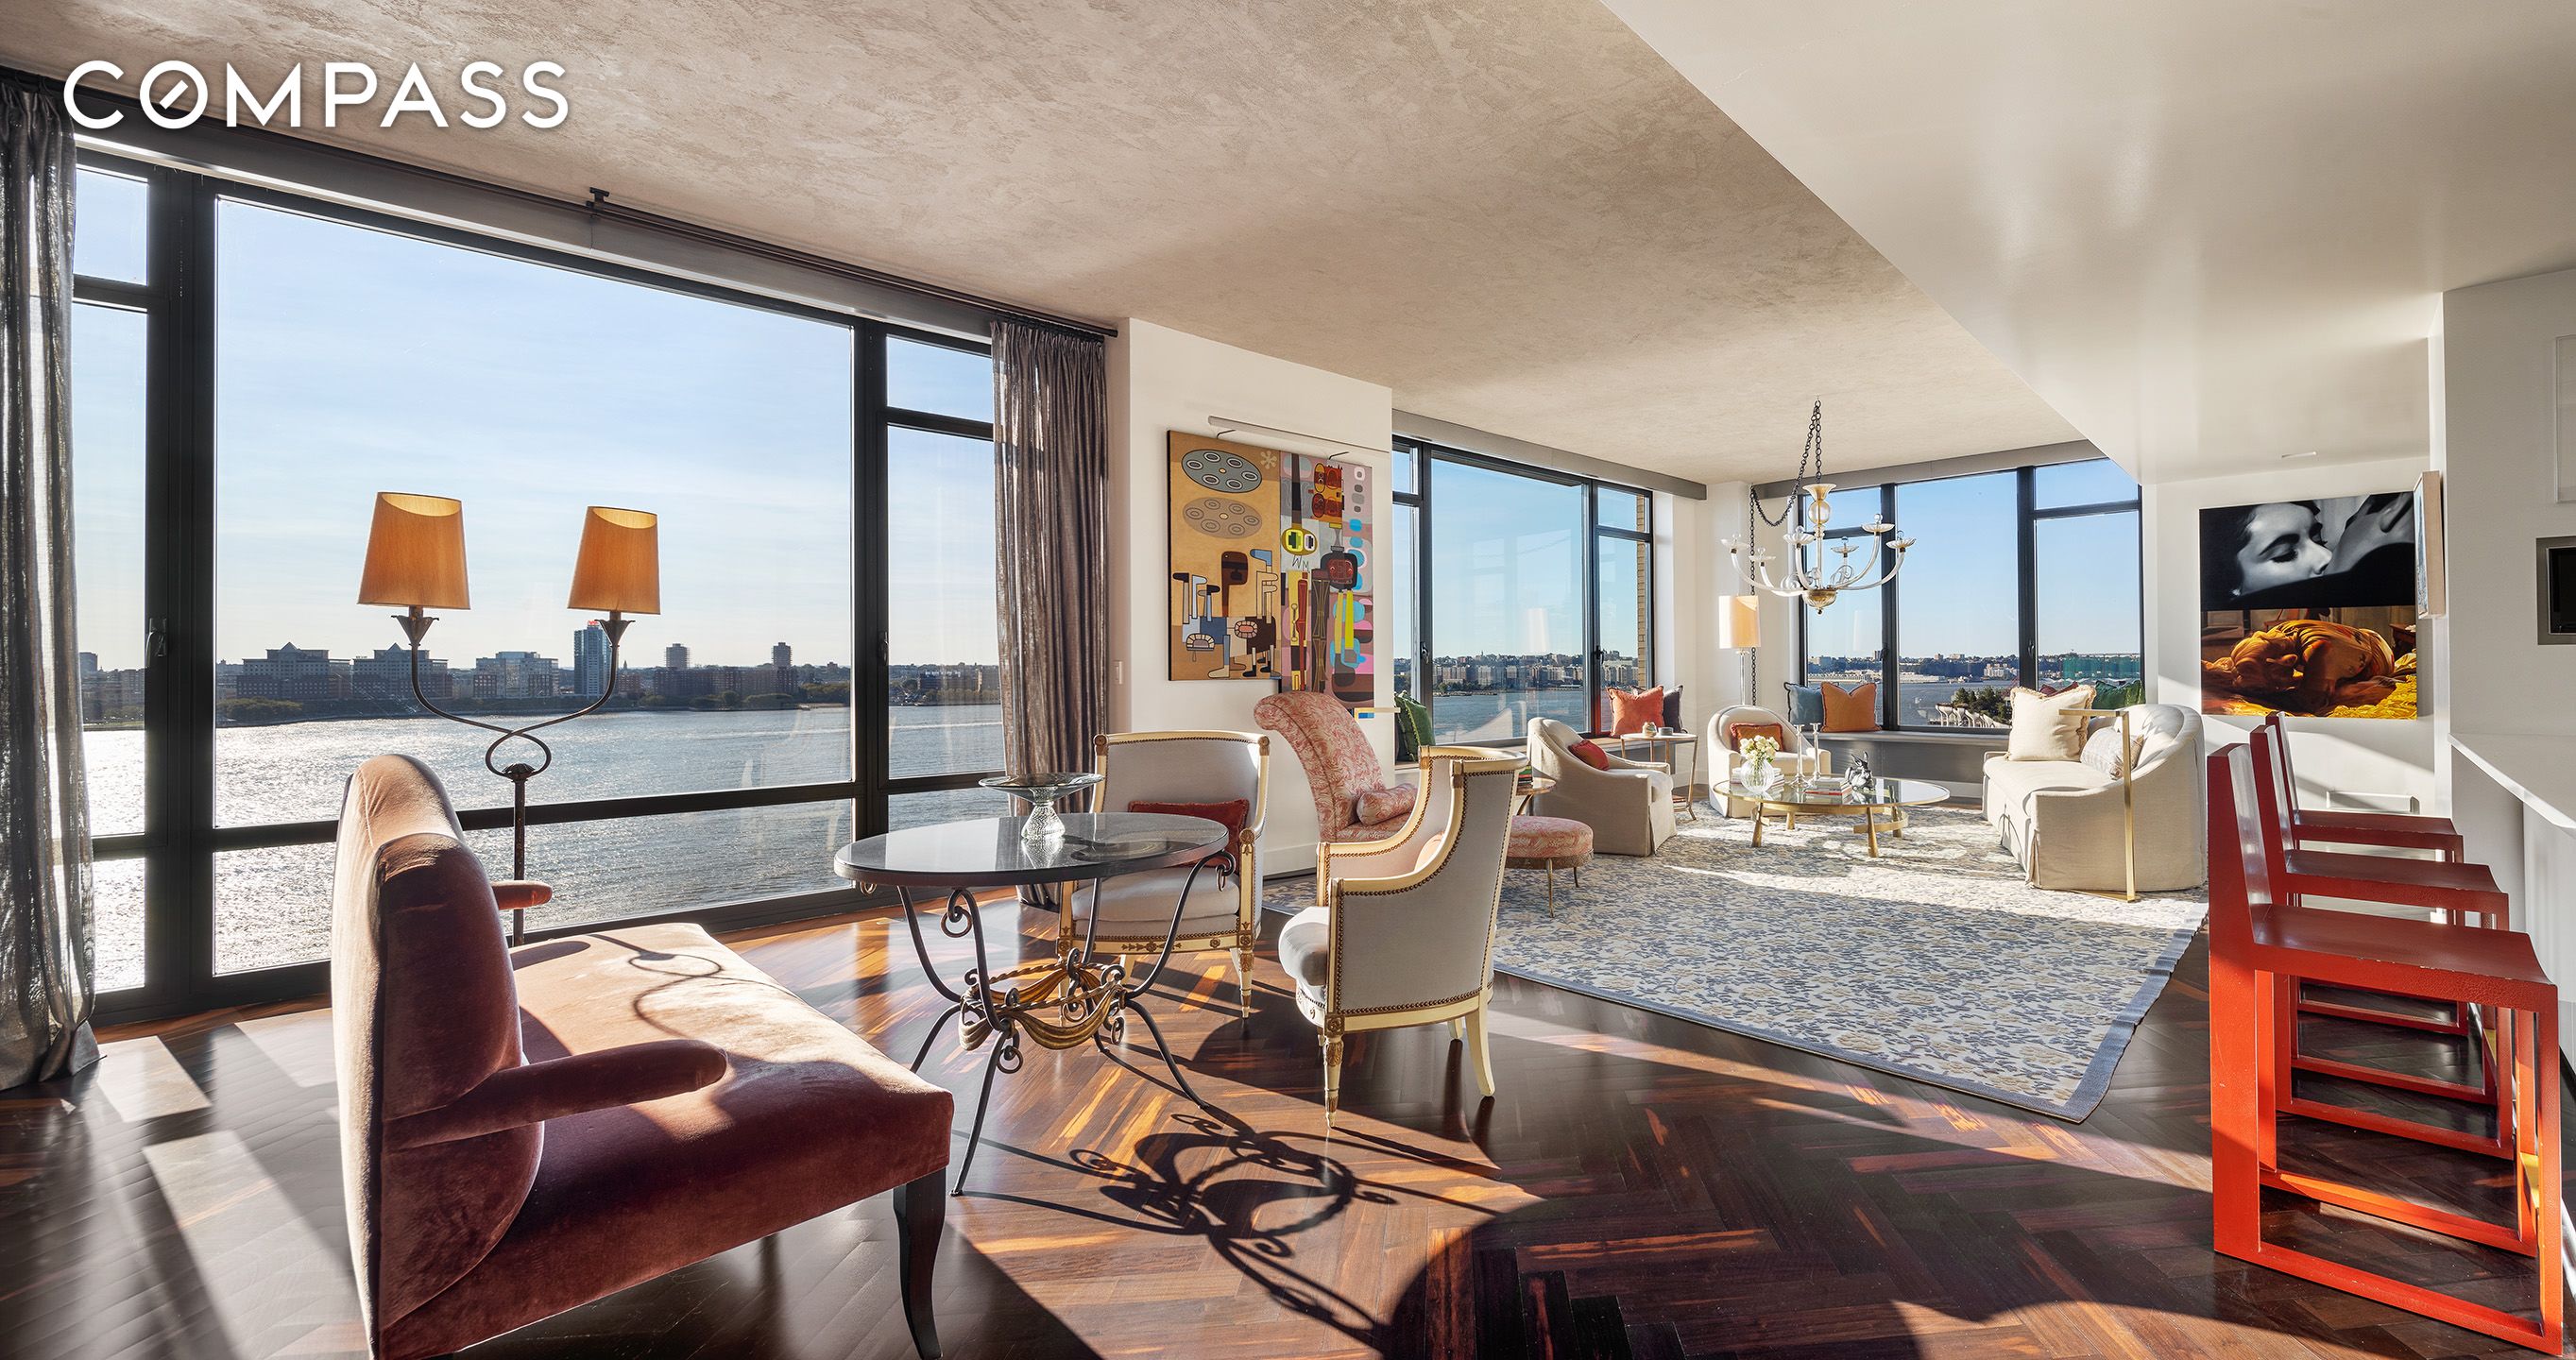 400 West 12th Street 12C, West Village, Downtown, NYC - 5 Bedrooms  
5.5 Bathrooms  
10 Rooms - 